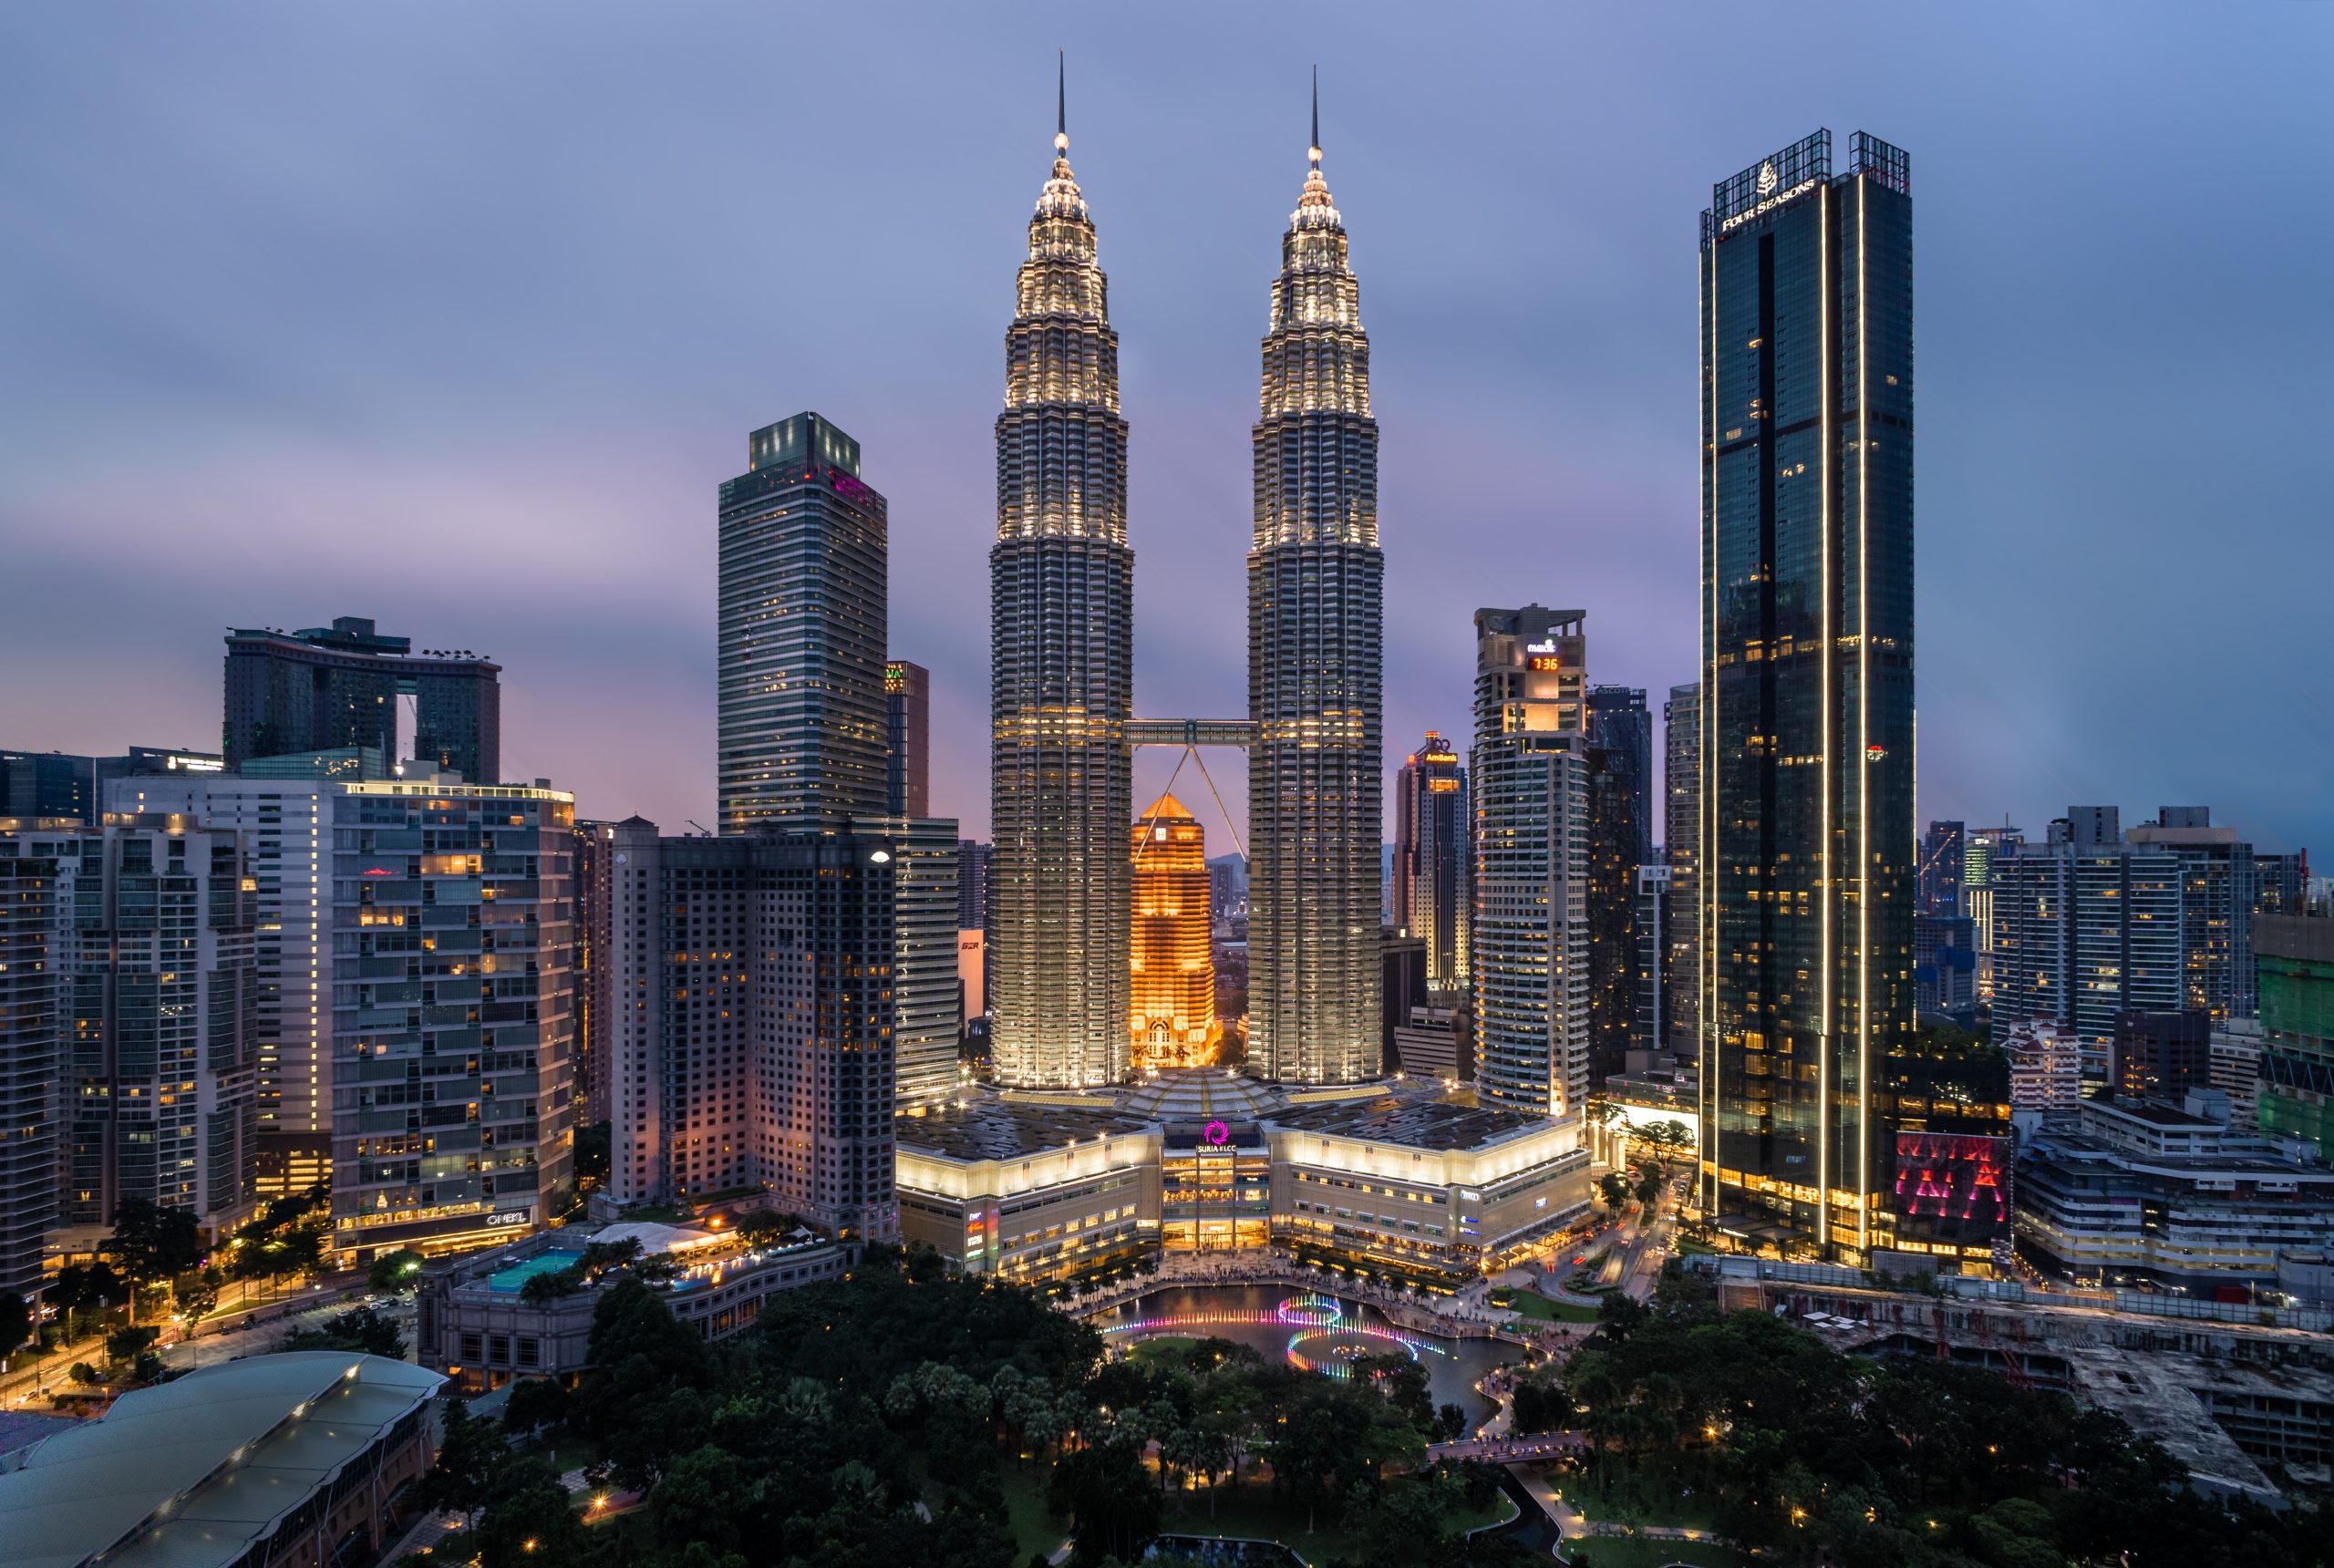 Traveling to Kuala Lumpur, Malaysia? Here are the Top 10 Most Frequently Asked Questions (with Answers!)